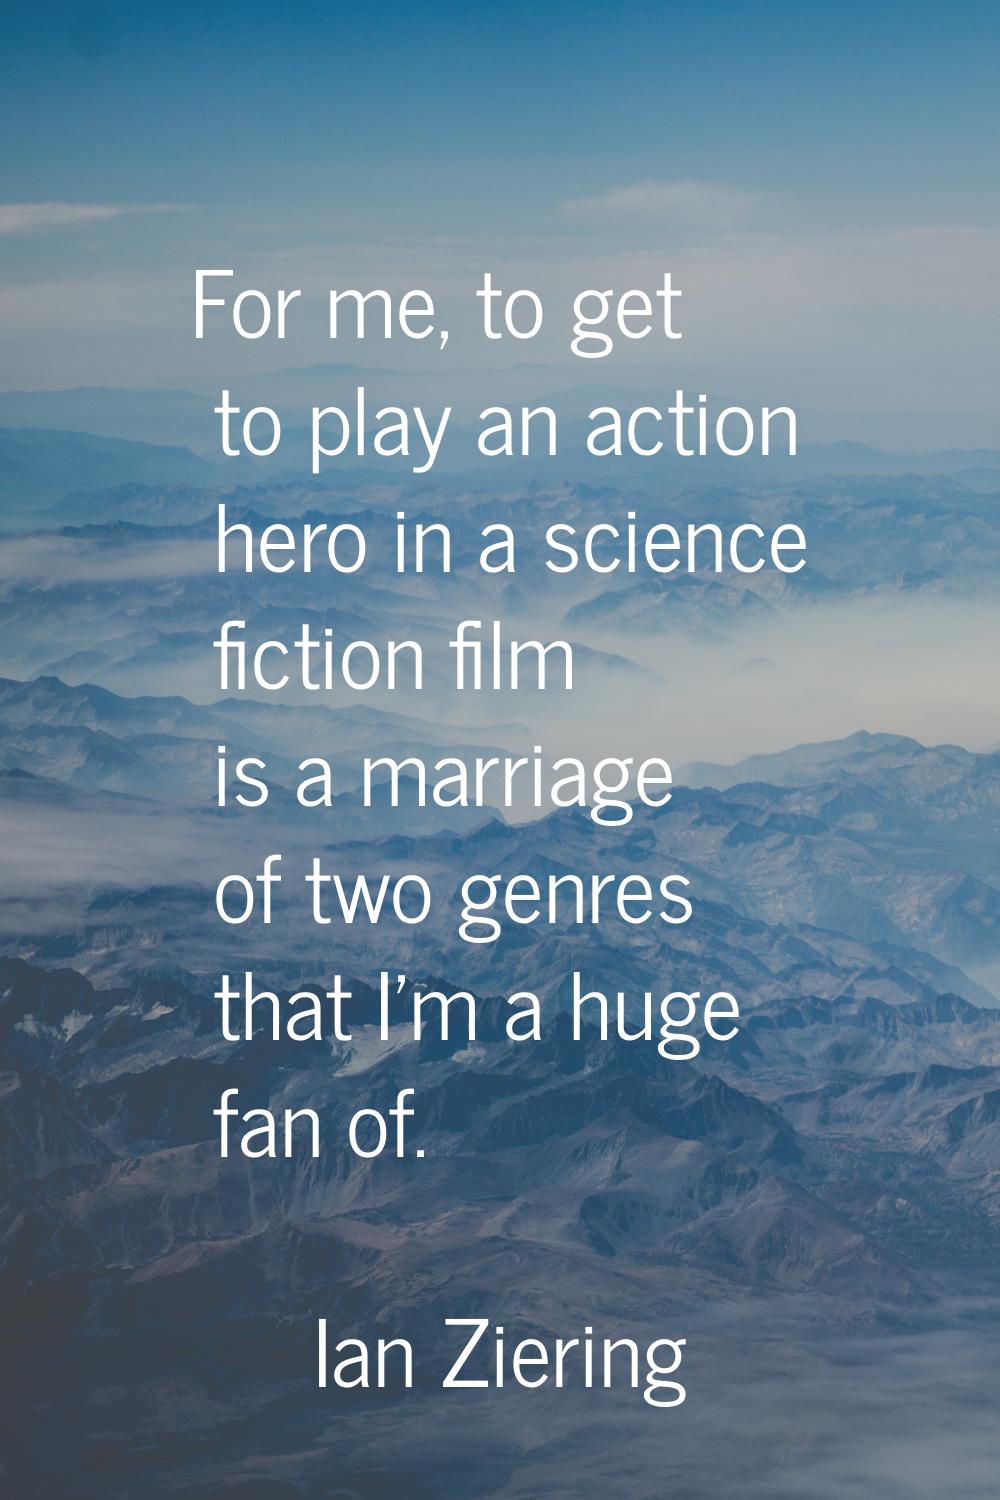 For me, to get to play an action hero in a science fiction film is a marriage of two genres that I'